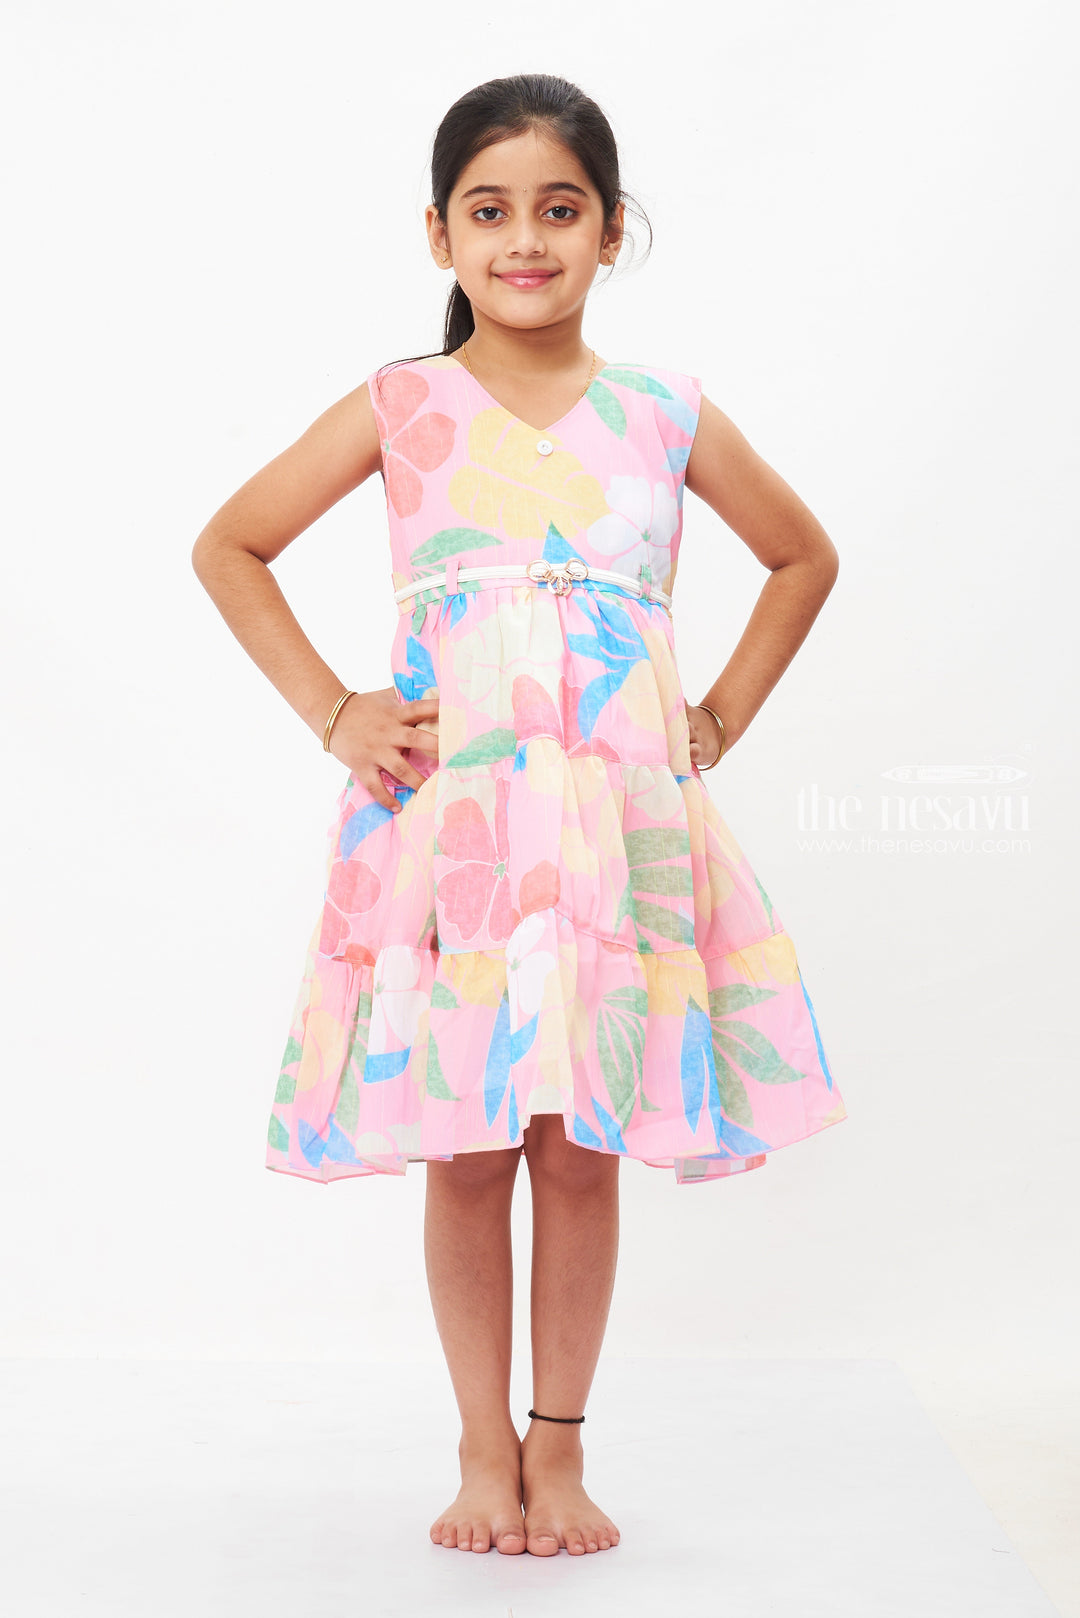 The Nesavu Girls Fancy Frock Girls Summery Floral Belted Dress - Bright and Breezy Nesavu 20 (3Y) / Pink / Georgette GFC1283A-20 Stylish Floral Girls Dresses for Summer | Playful & Cool | The Nesavu